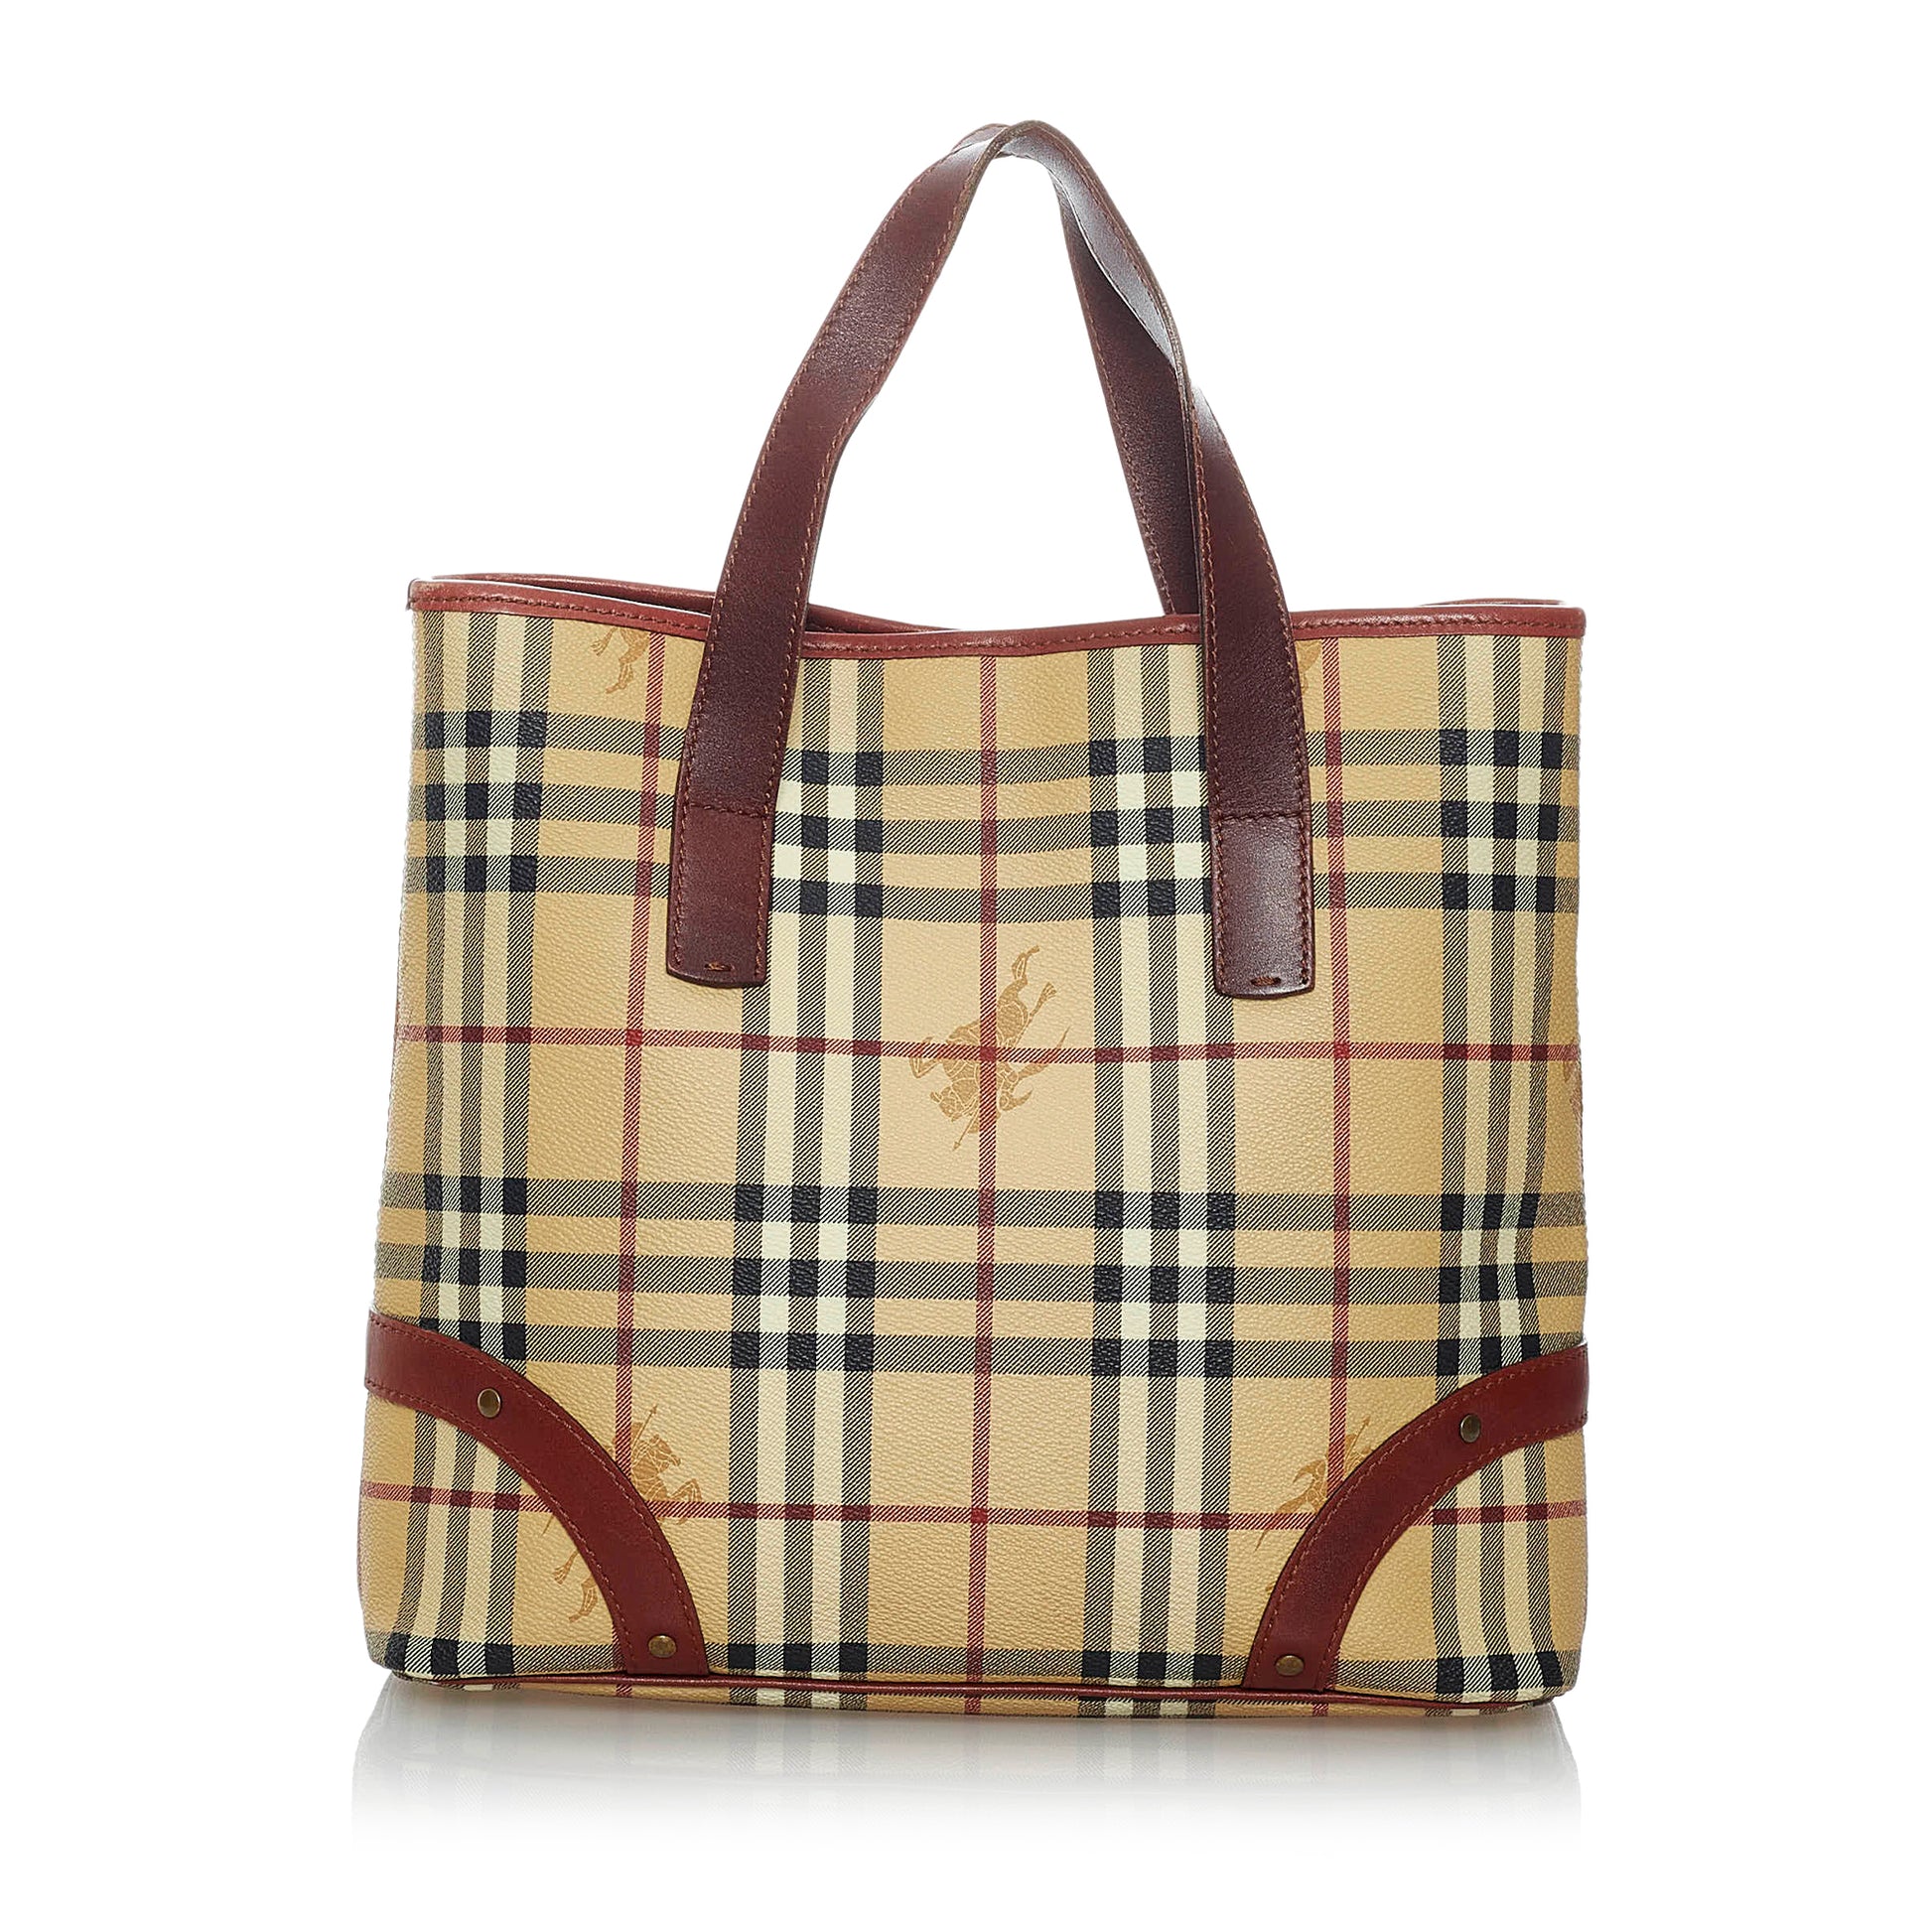 BURBERRY Blue Label Brown Khaki Canvas Leather Tote Bag -  Israel